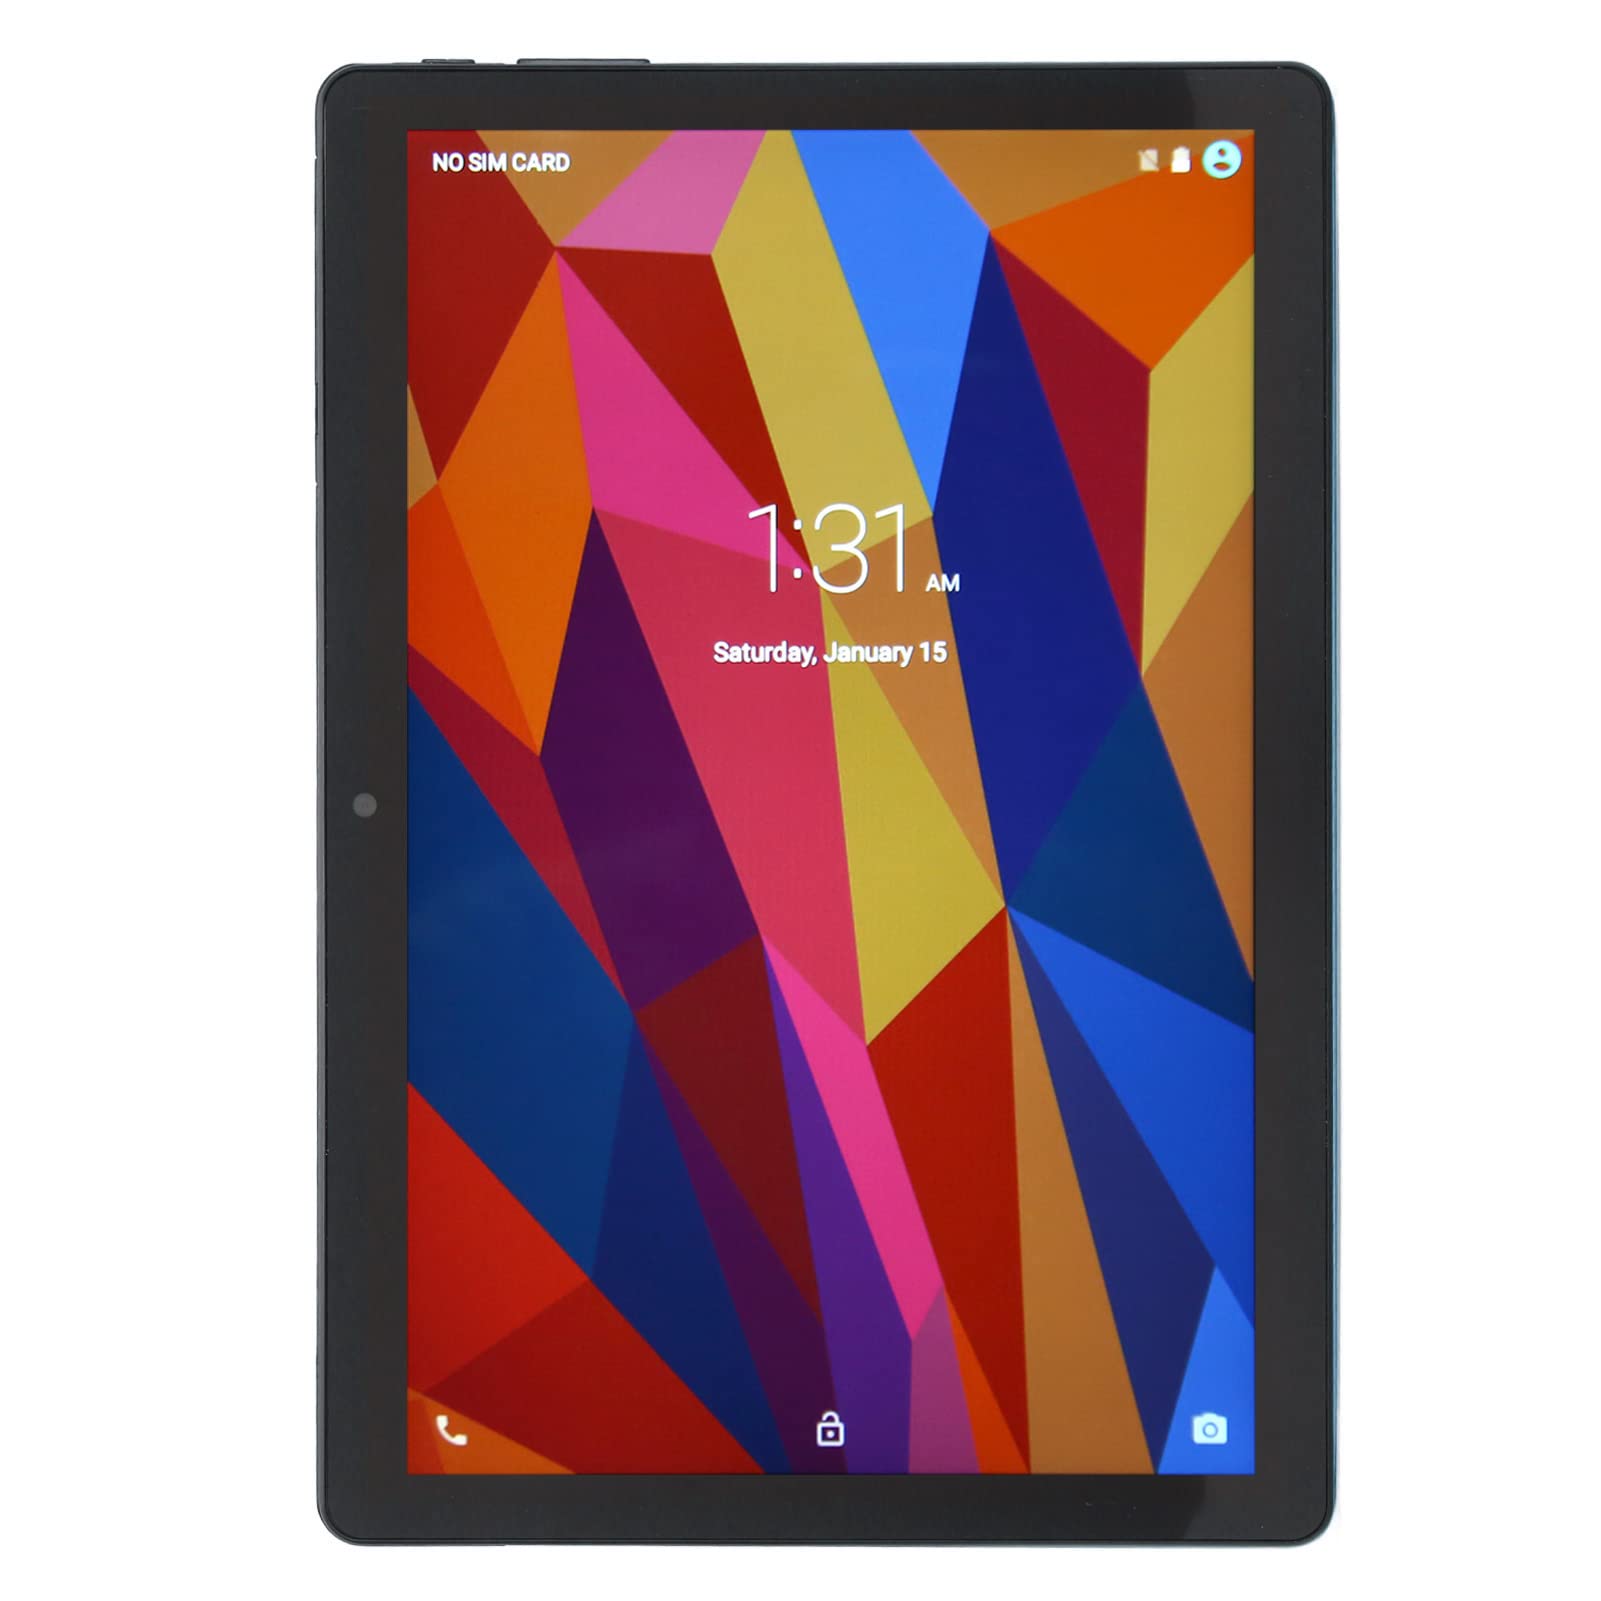 10.1In Tablet for Android11, 1.5 GHz Octa Core 1920x1200 IPS Screen, 8GB RAM, 256GB ROM, 5+13MP Dual Cameras and Speakers, 5800mAh Type C Charging